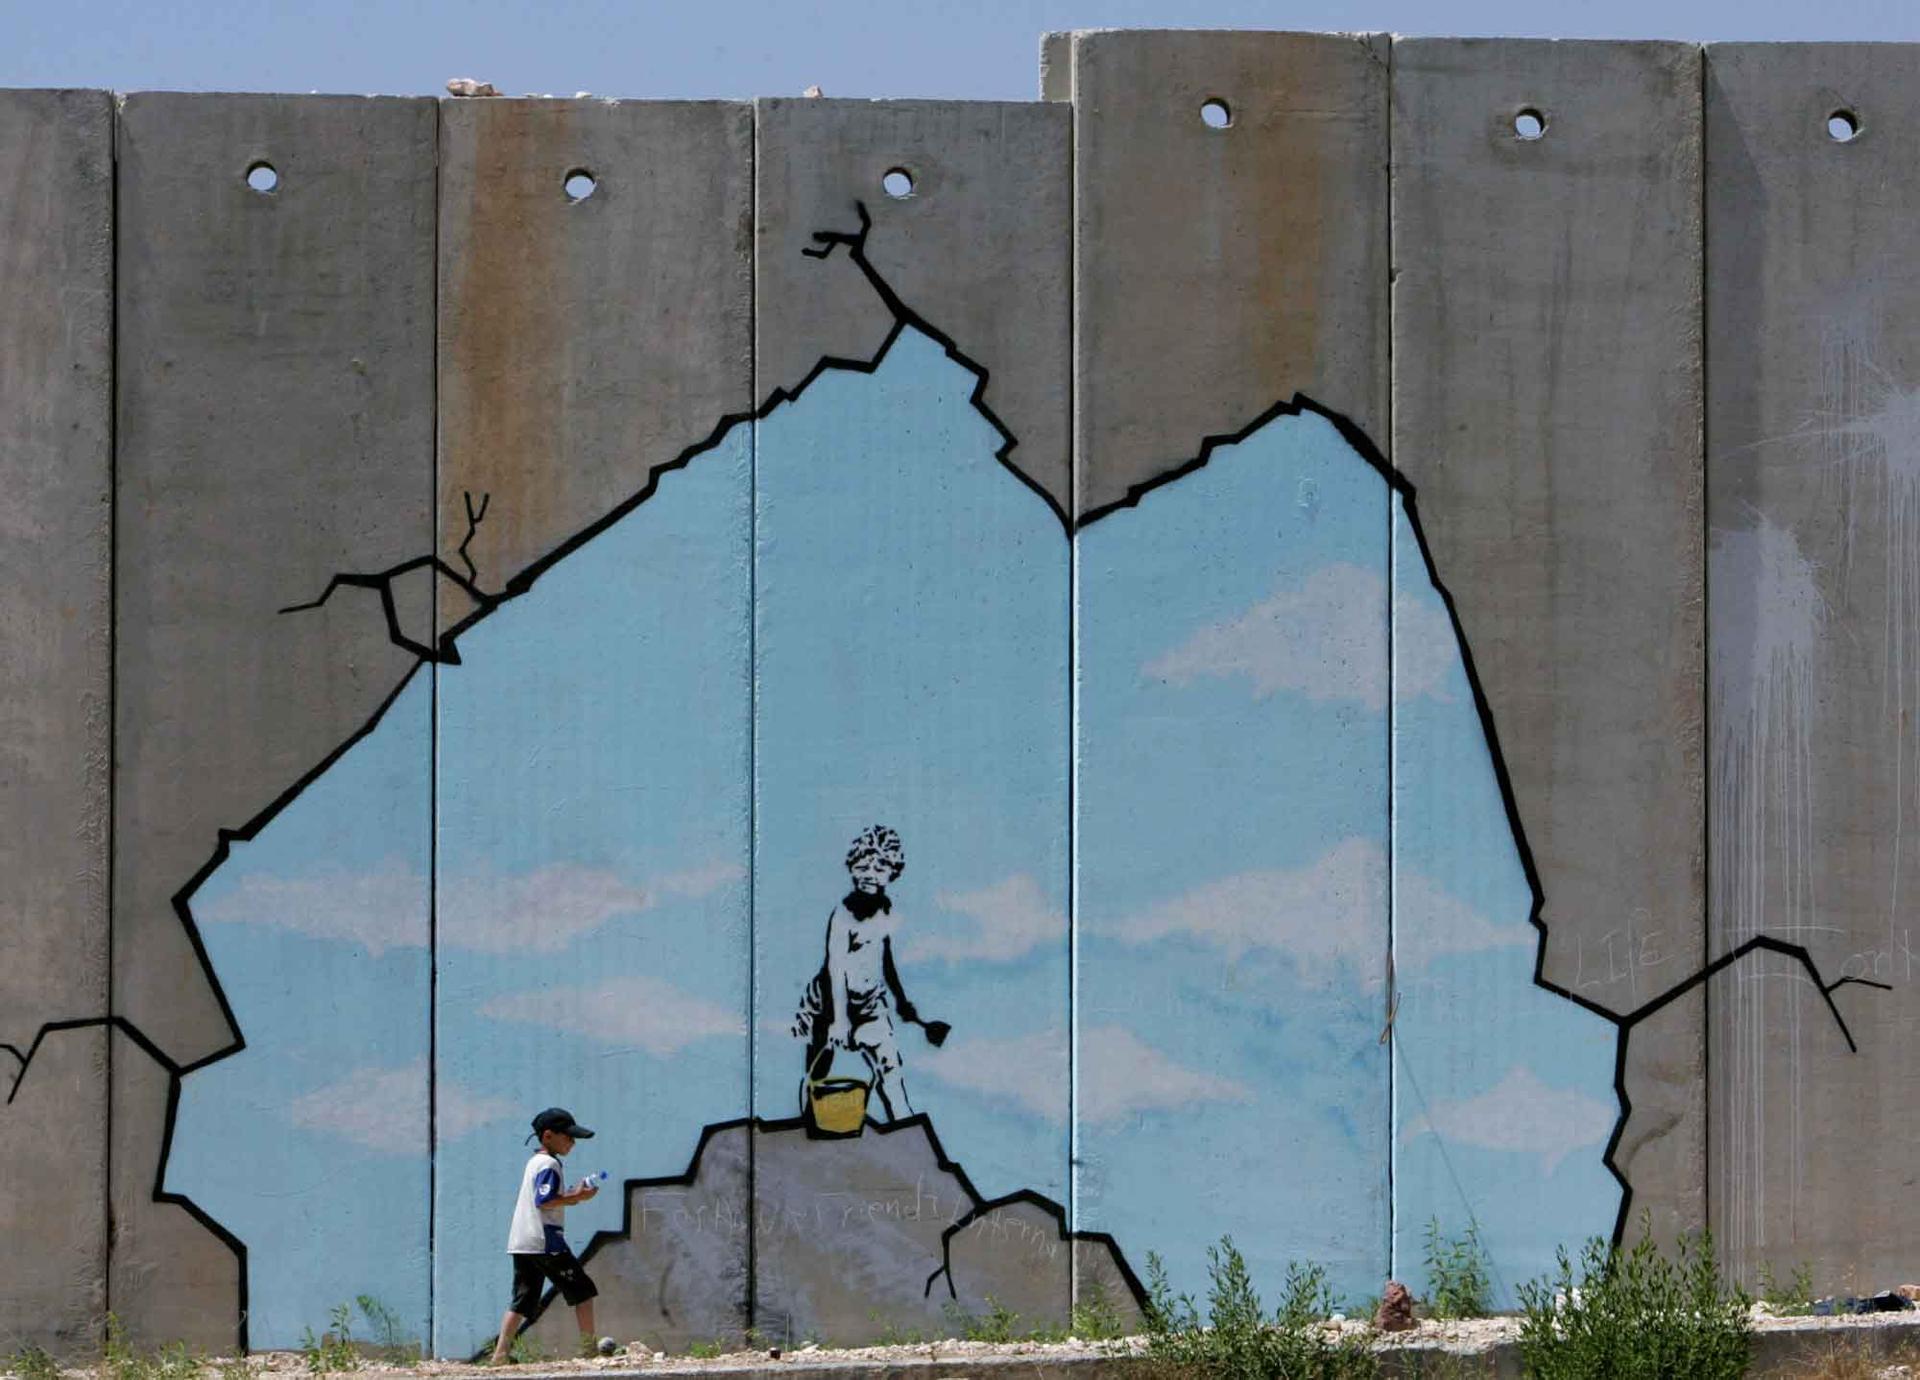 A Palestinian boy walks past a drawing by British graffiti artist Banksy, along part of the controversial Israeli barrier near the Kalandia checkpoint in the West Bank August 10, 2005.